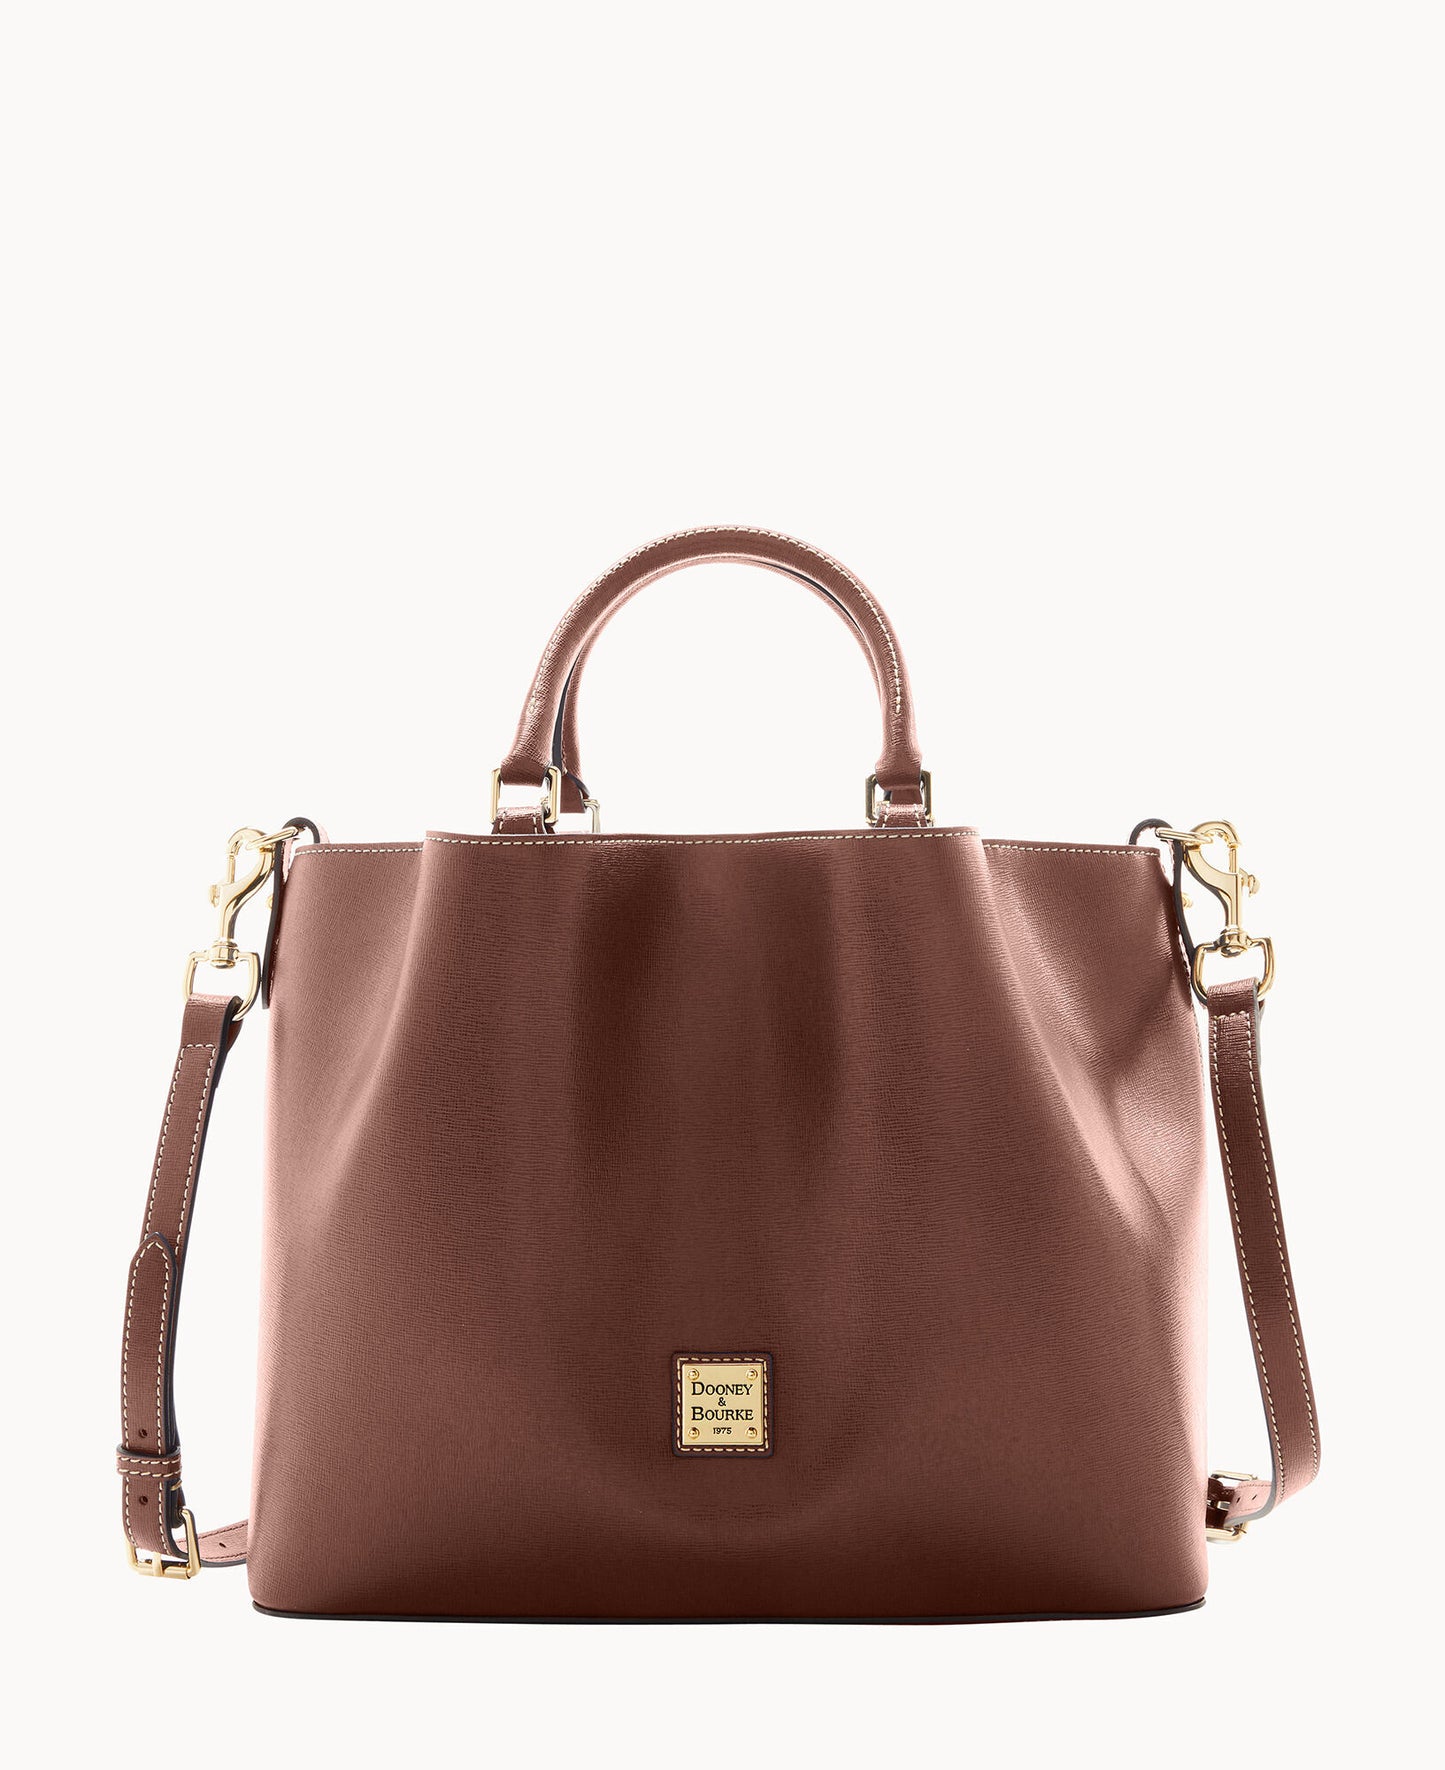 Dooney & Bourke Pebble Leather Large Tote on QVC 